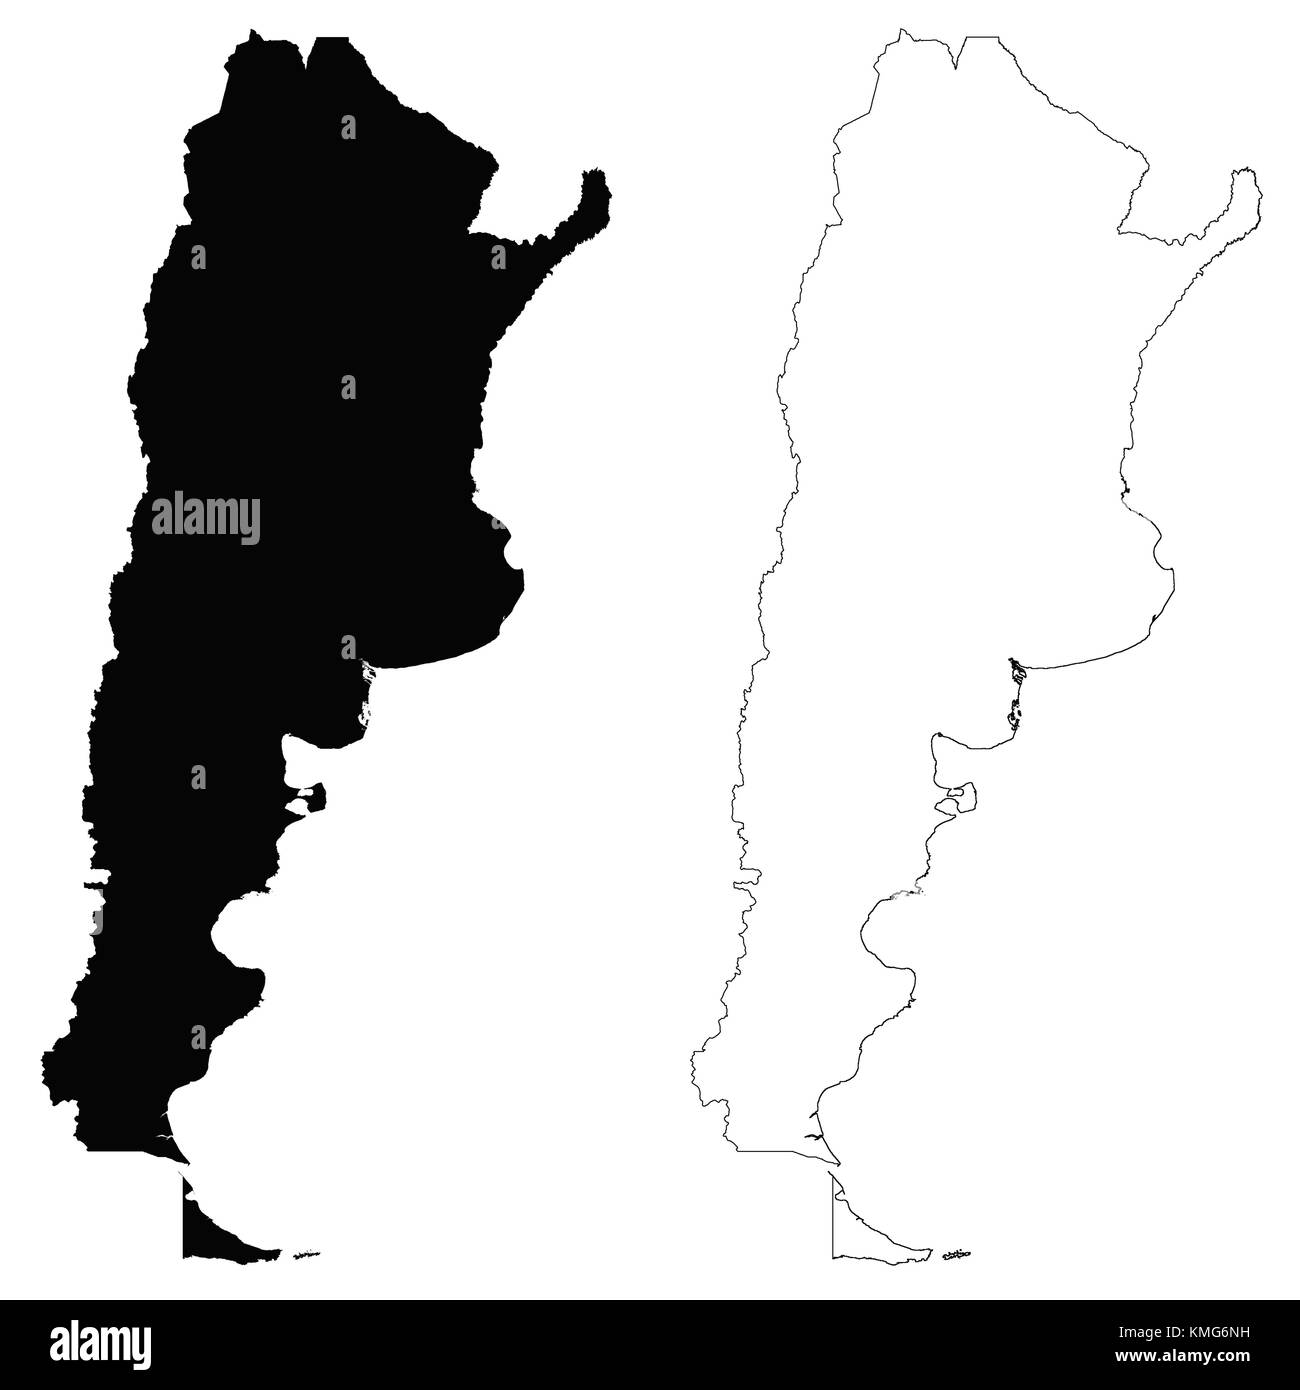 Argentina outline map Stock Vector